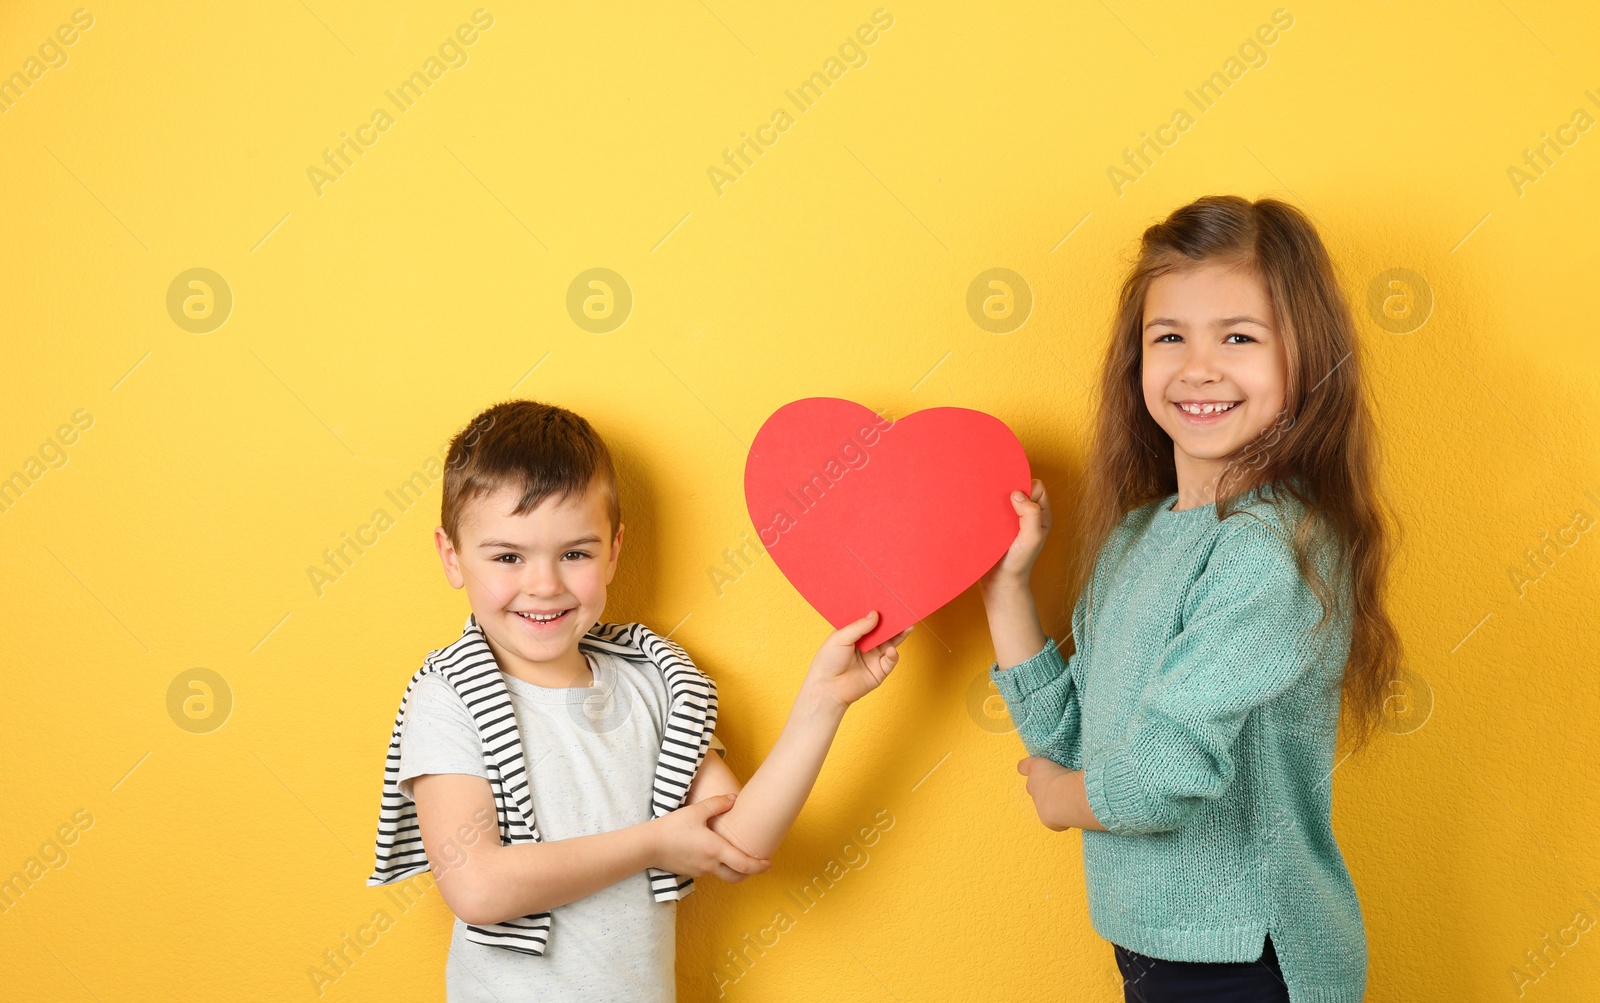 Photo of Happy children holding paper heart on color background